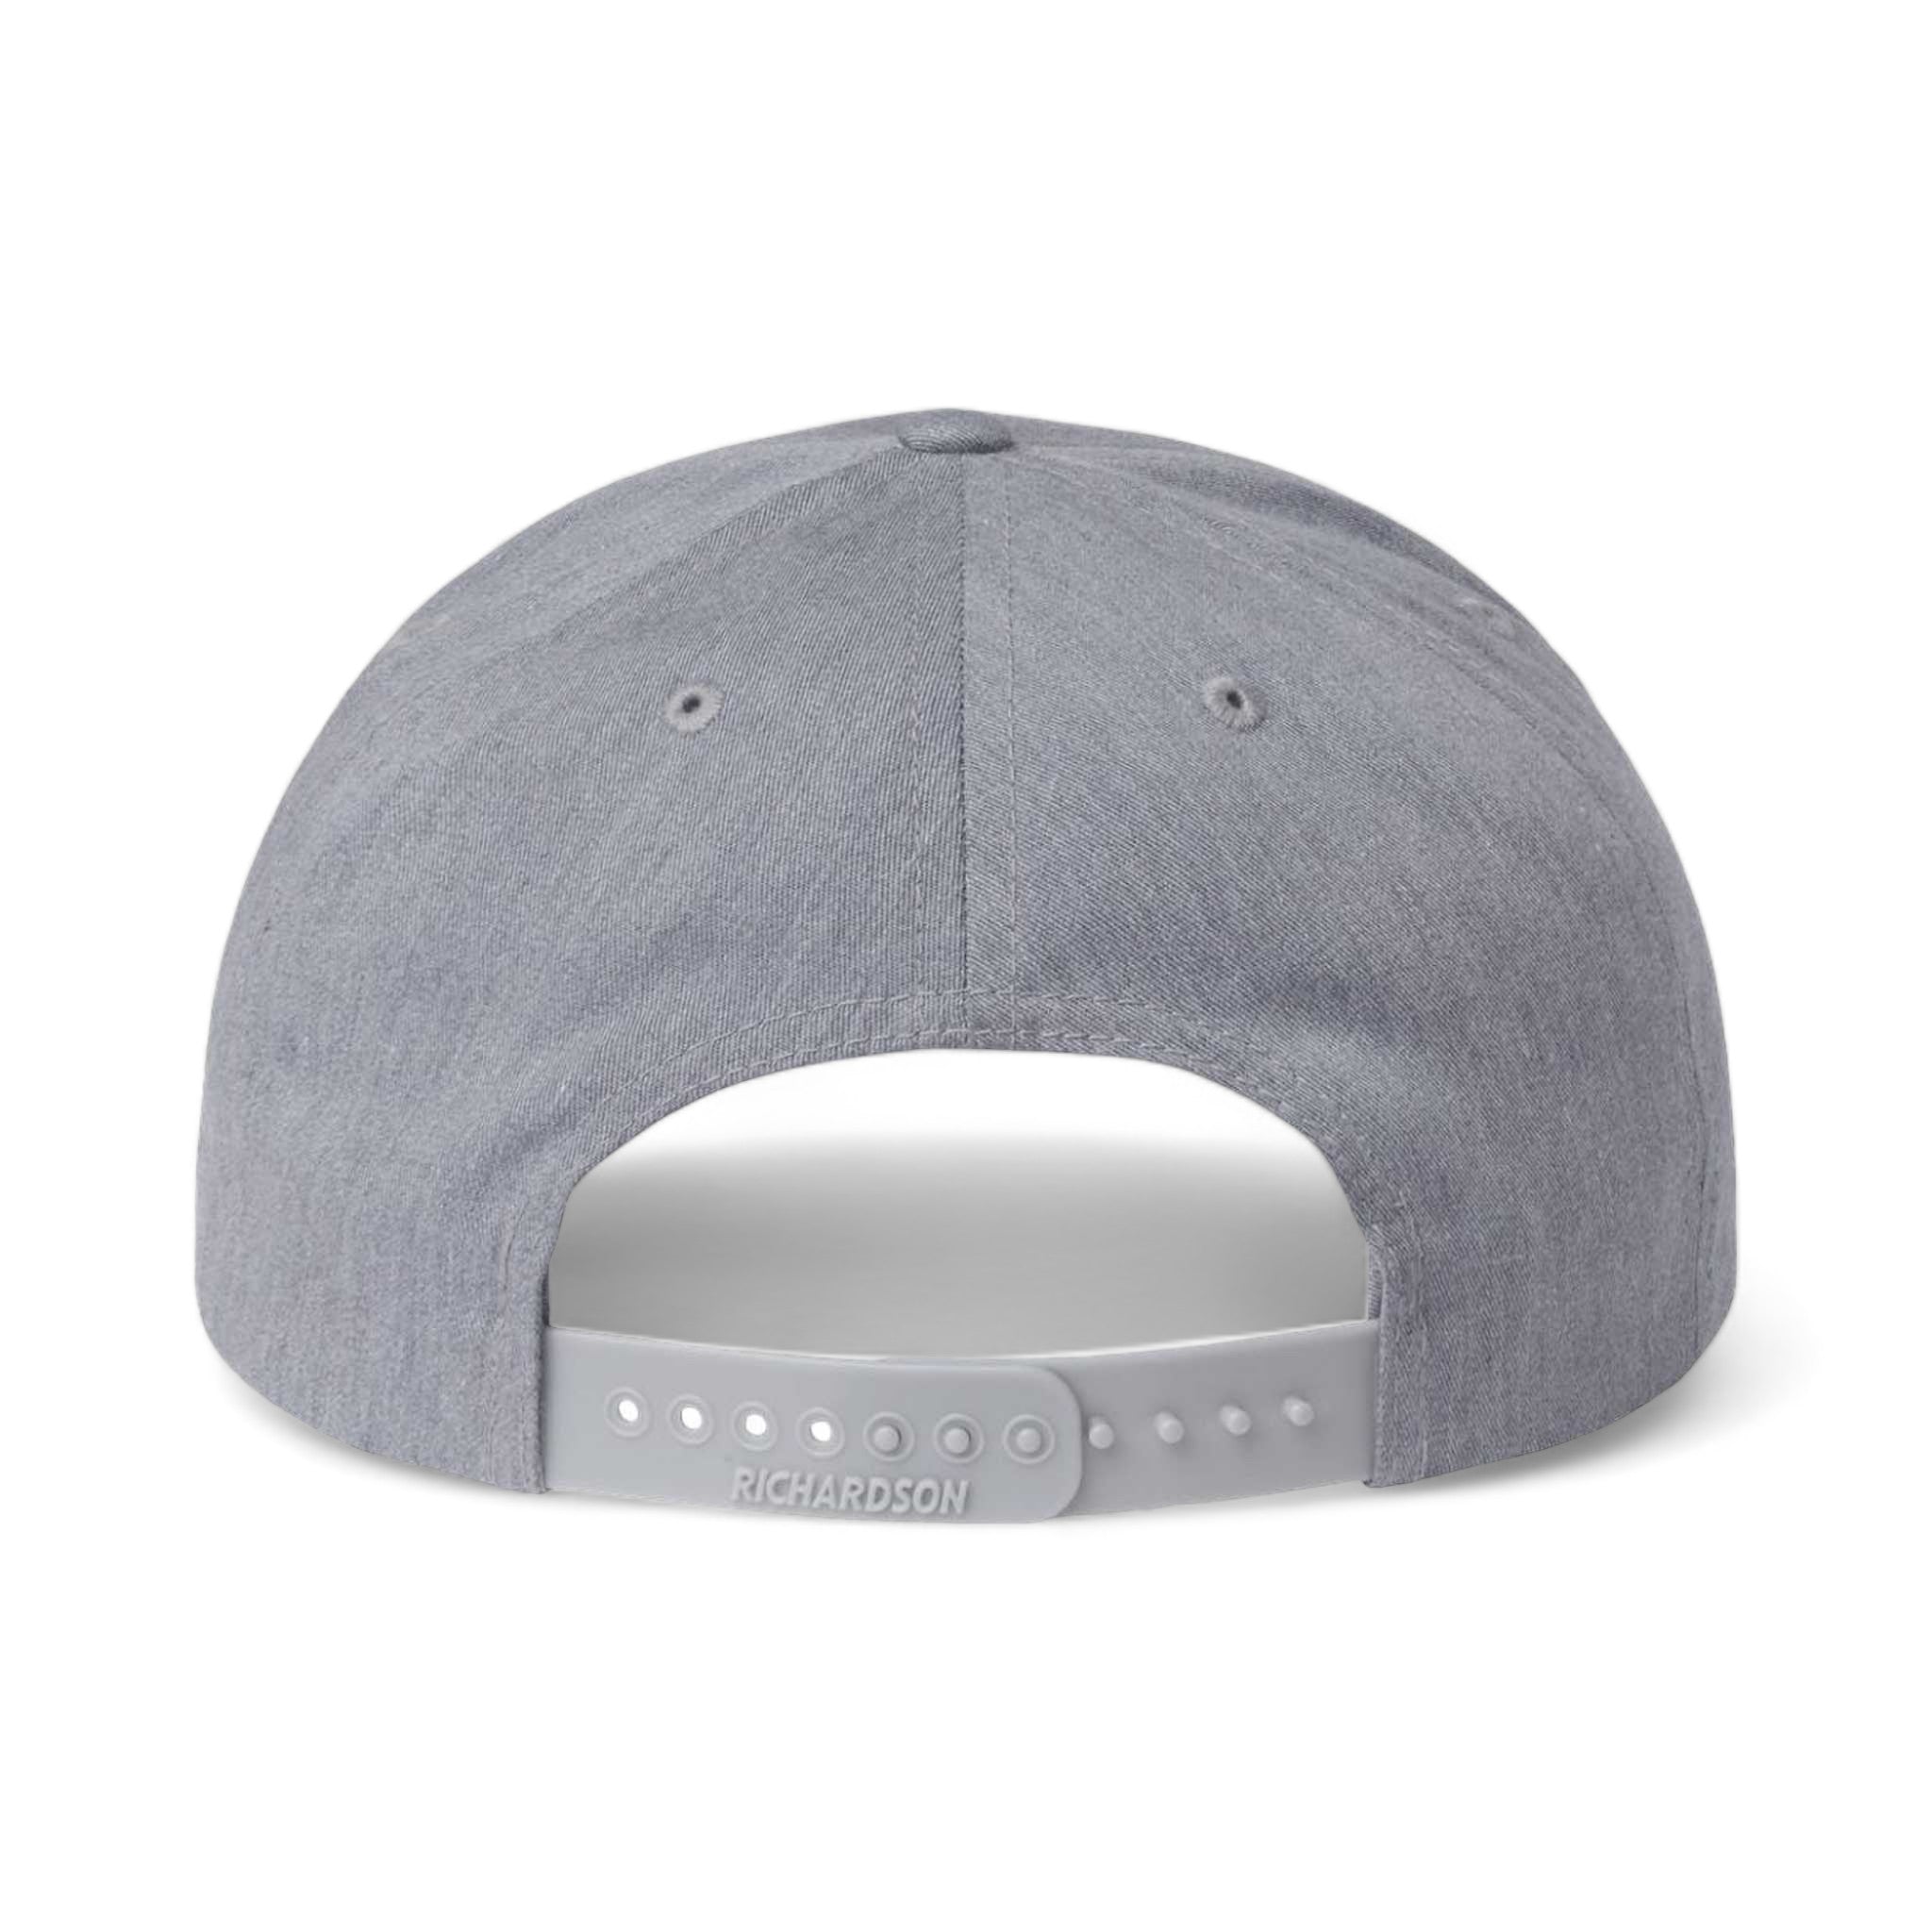 Back view of Richardson 255 custom hat in heather grey